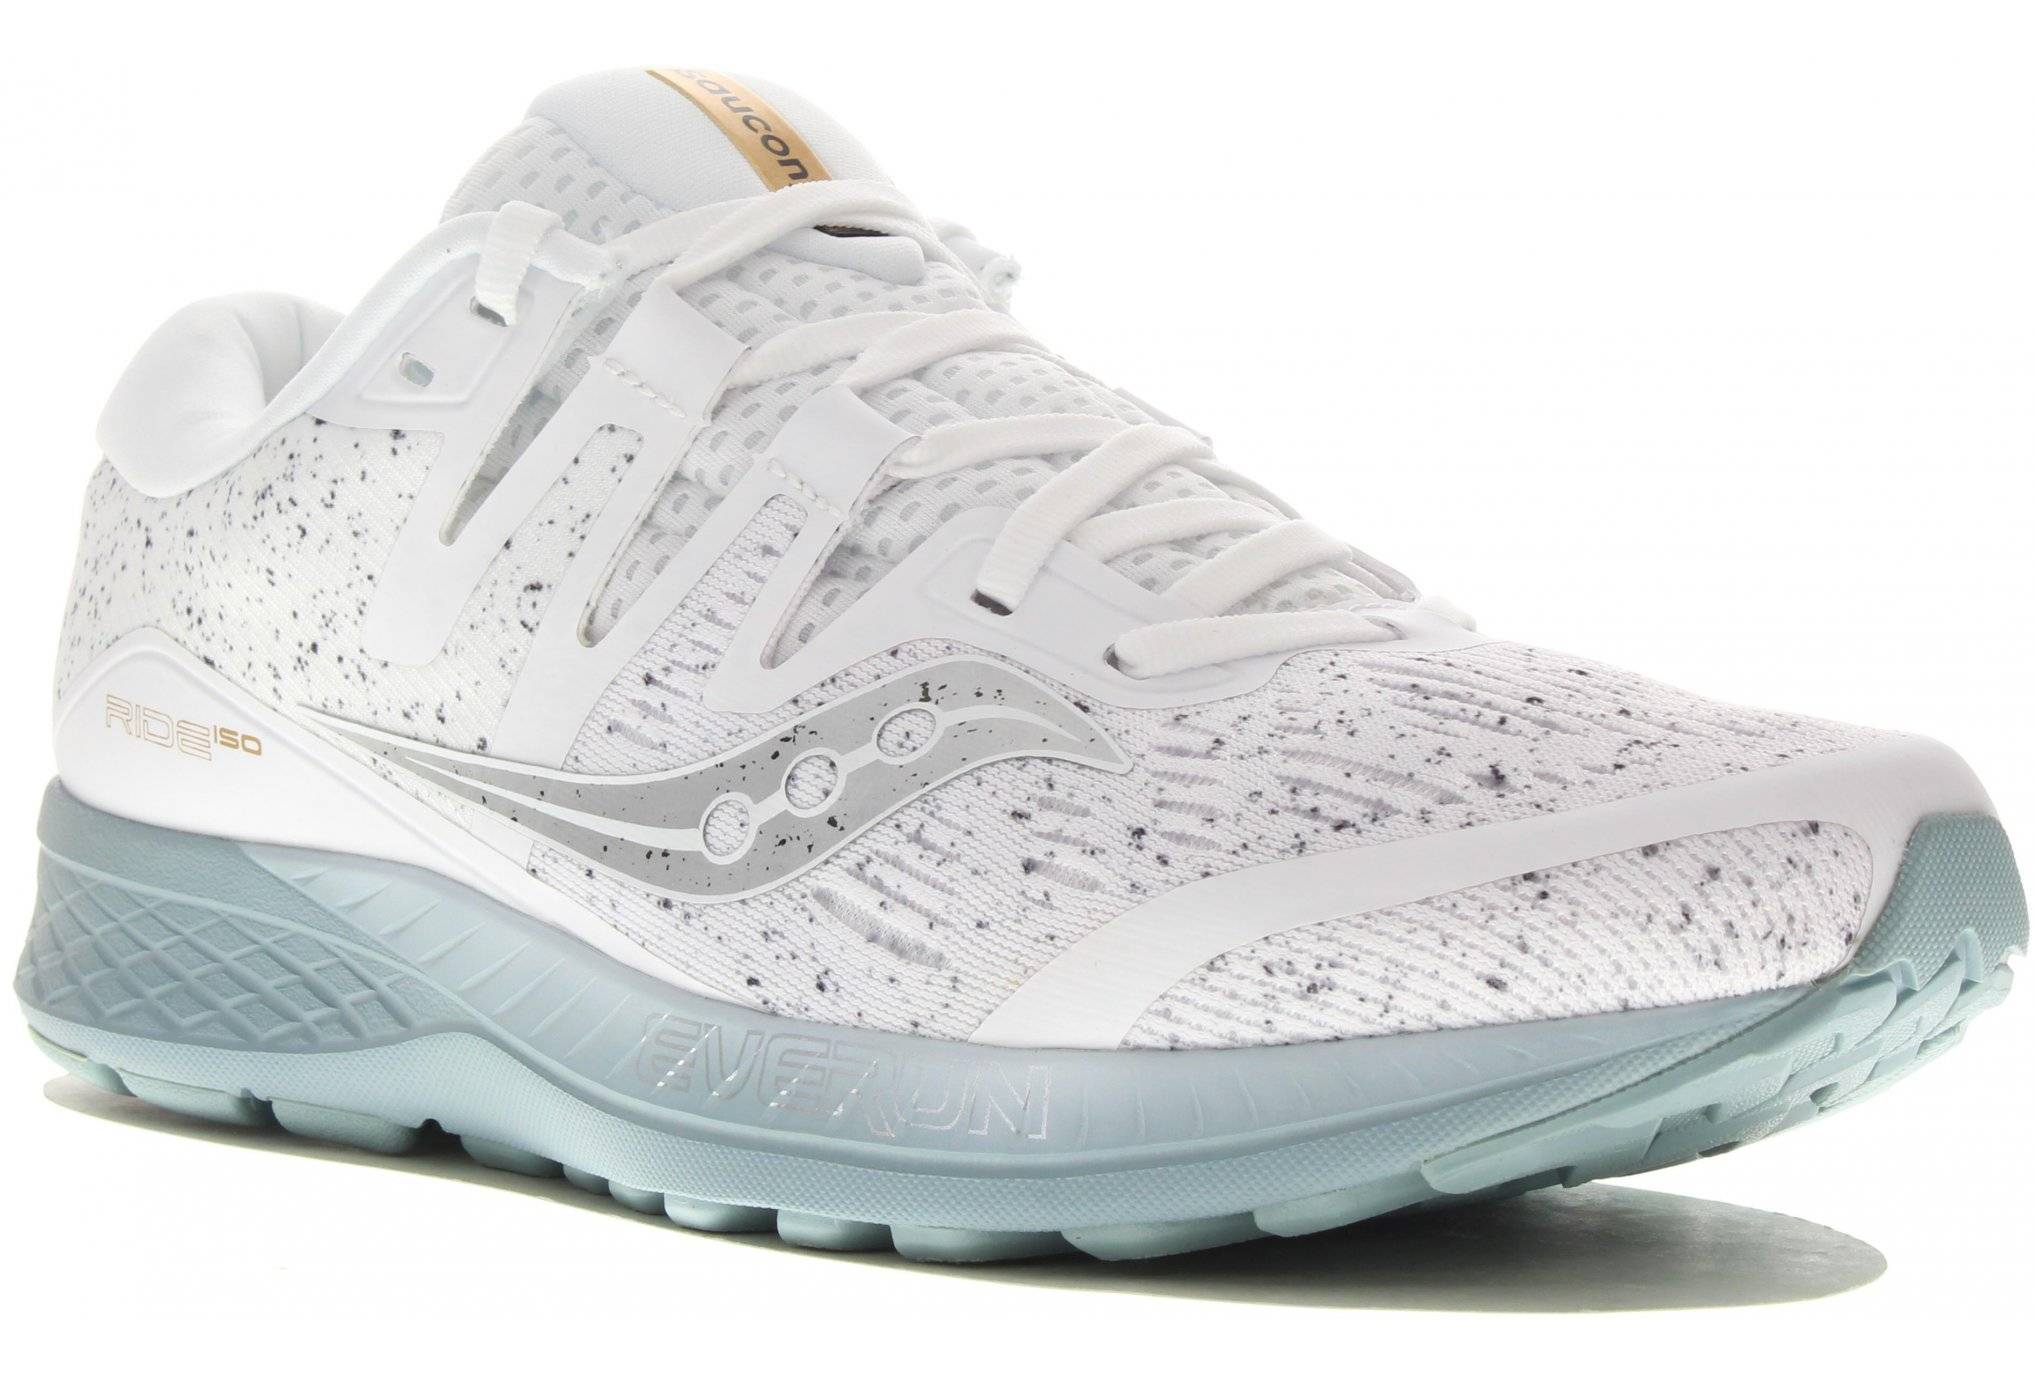 Saucony Ride ISO White Noise M 